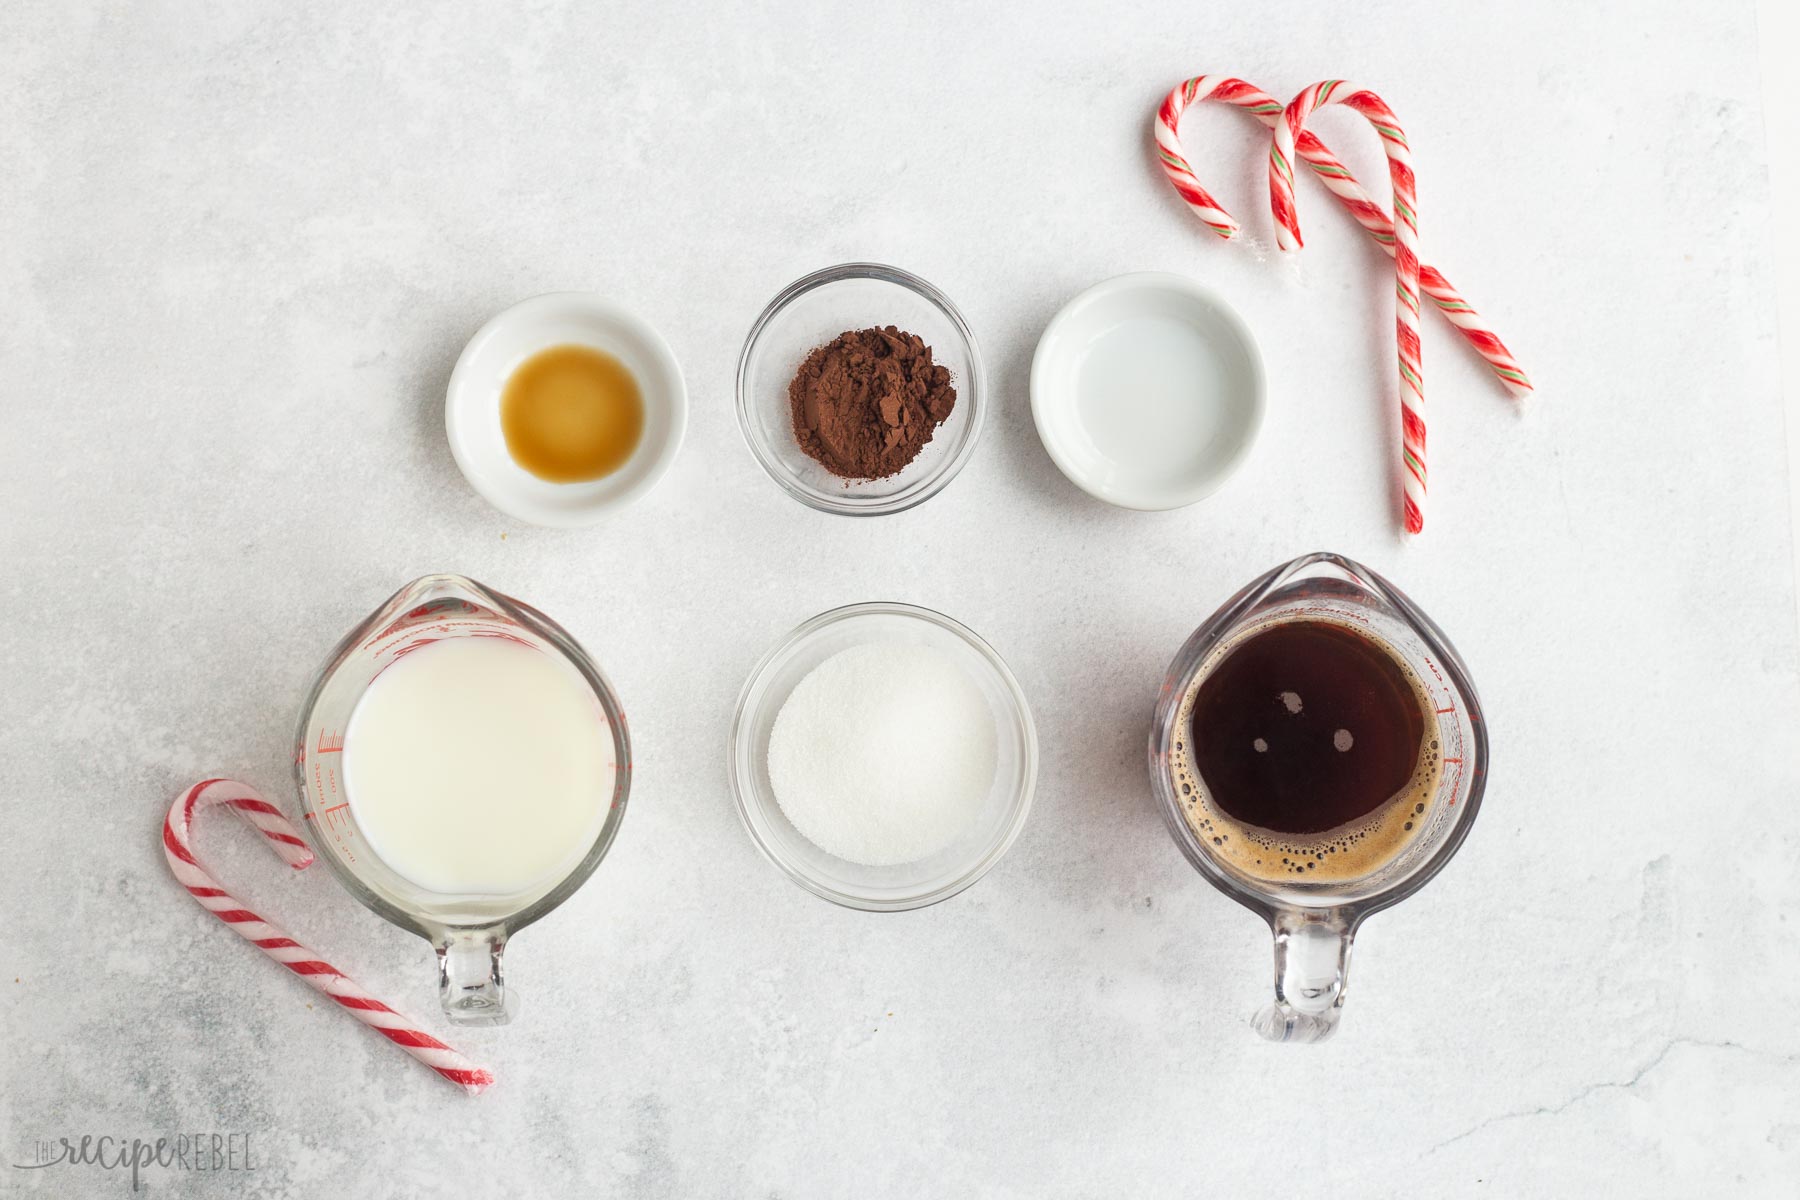 ingredients needed for peppermint mocha.